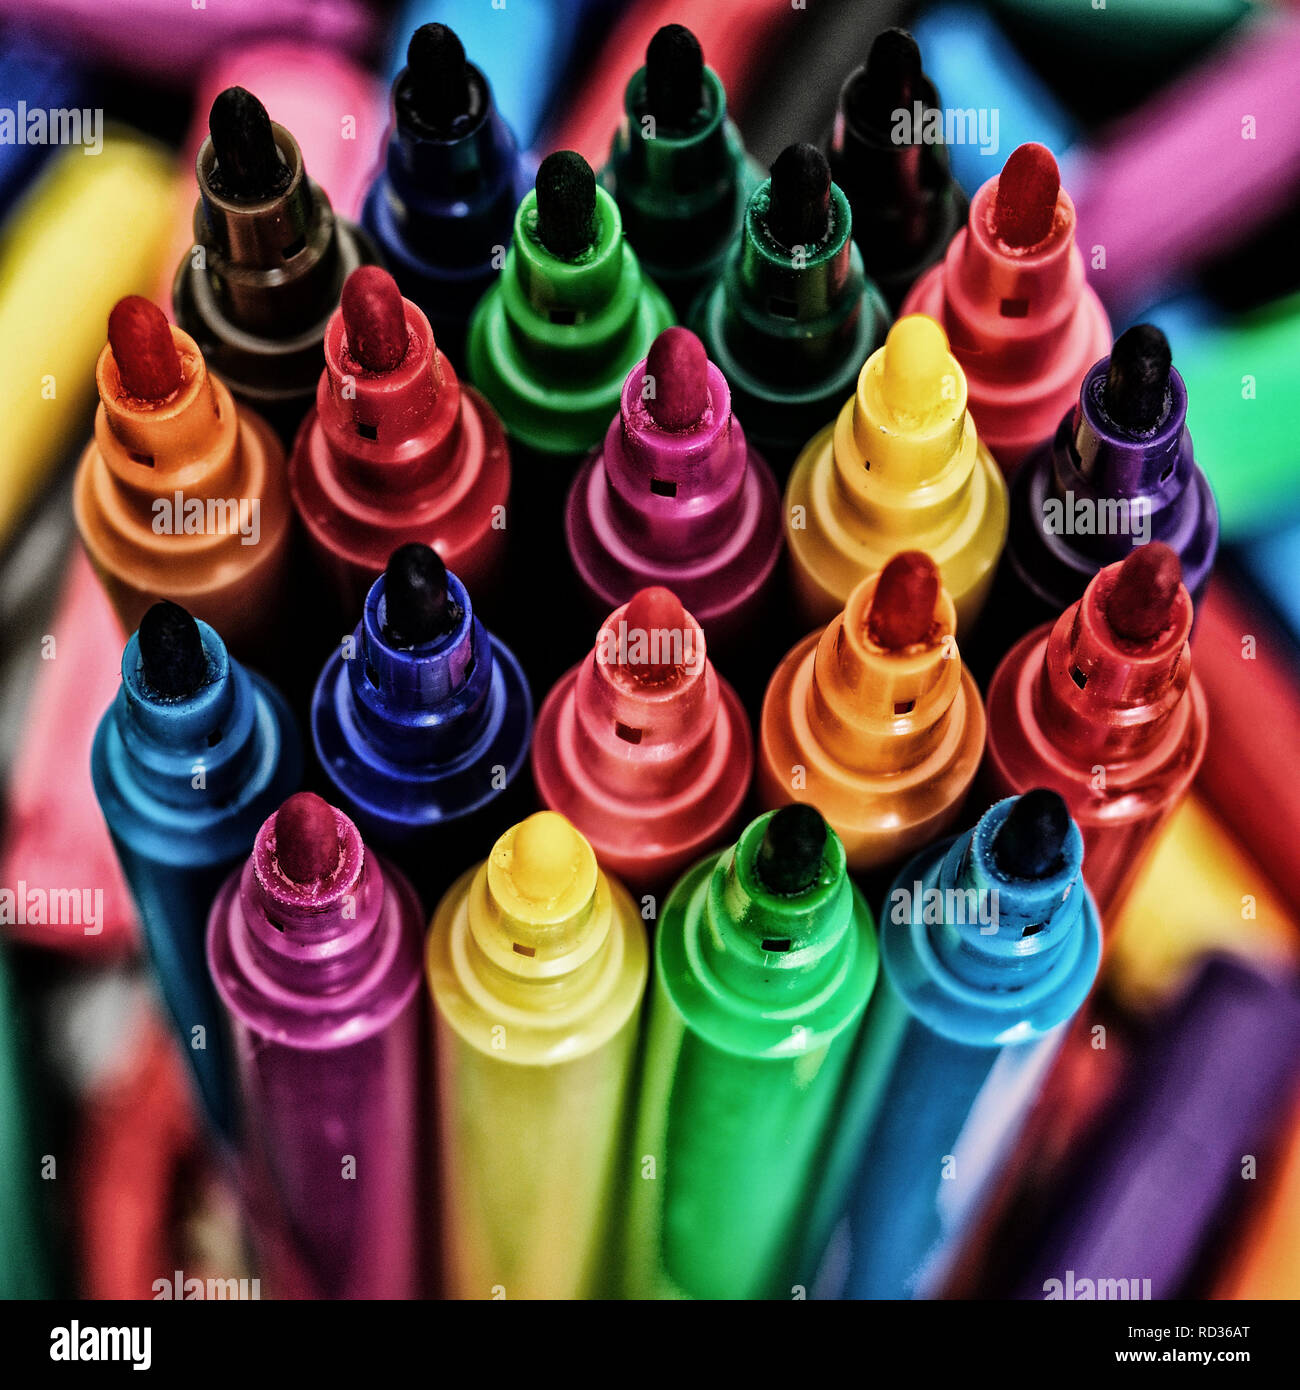 https://c8.alamy.com/comp/RD36AT/dozens-of-multi-colored-felt-tipped-pens-a-high-contrast-colorful-with-intense-color-RD36AT.jpg